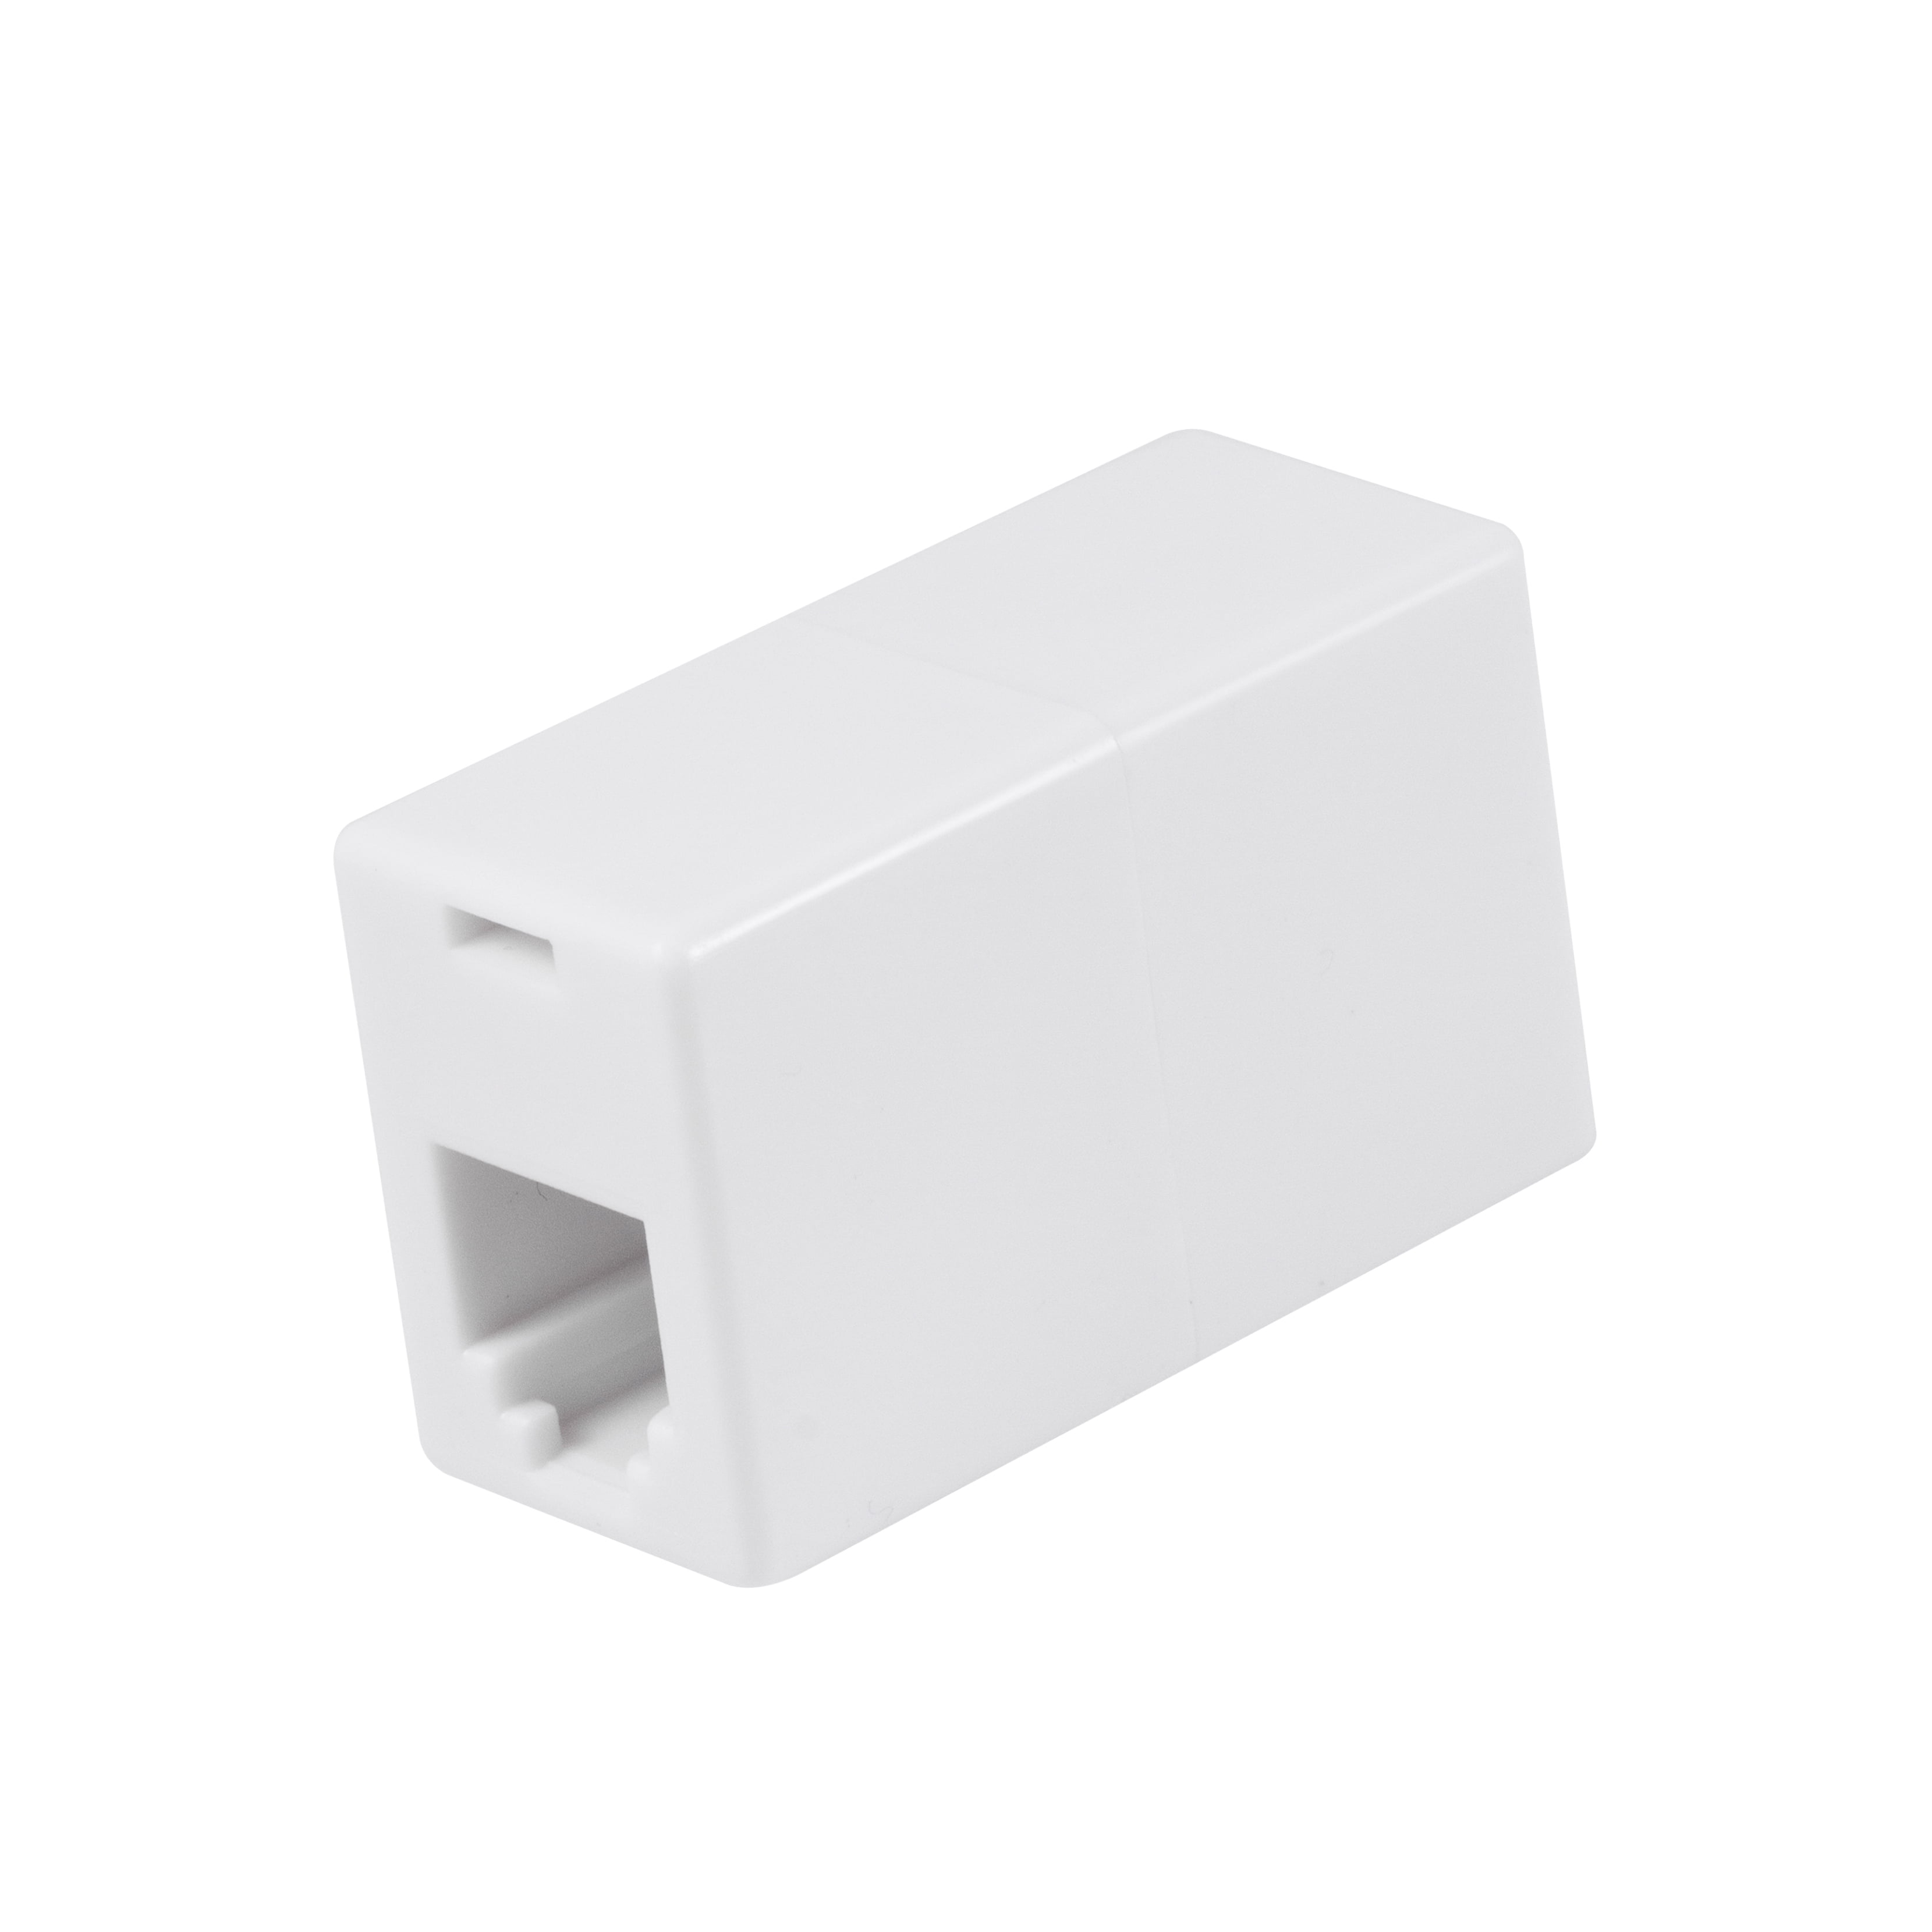 onn. In-line Telephone/Fax/Answering Machine Coupler, White, 100010009